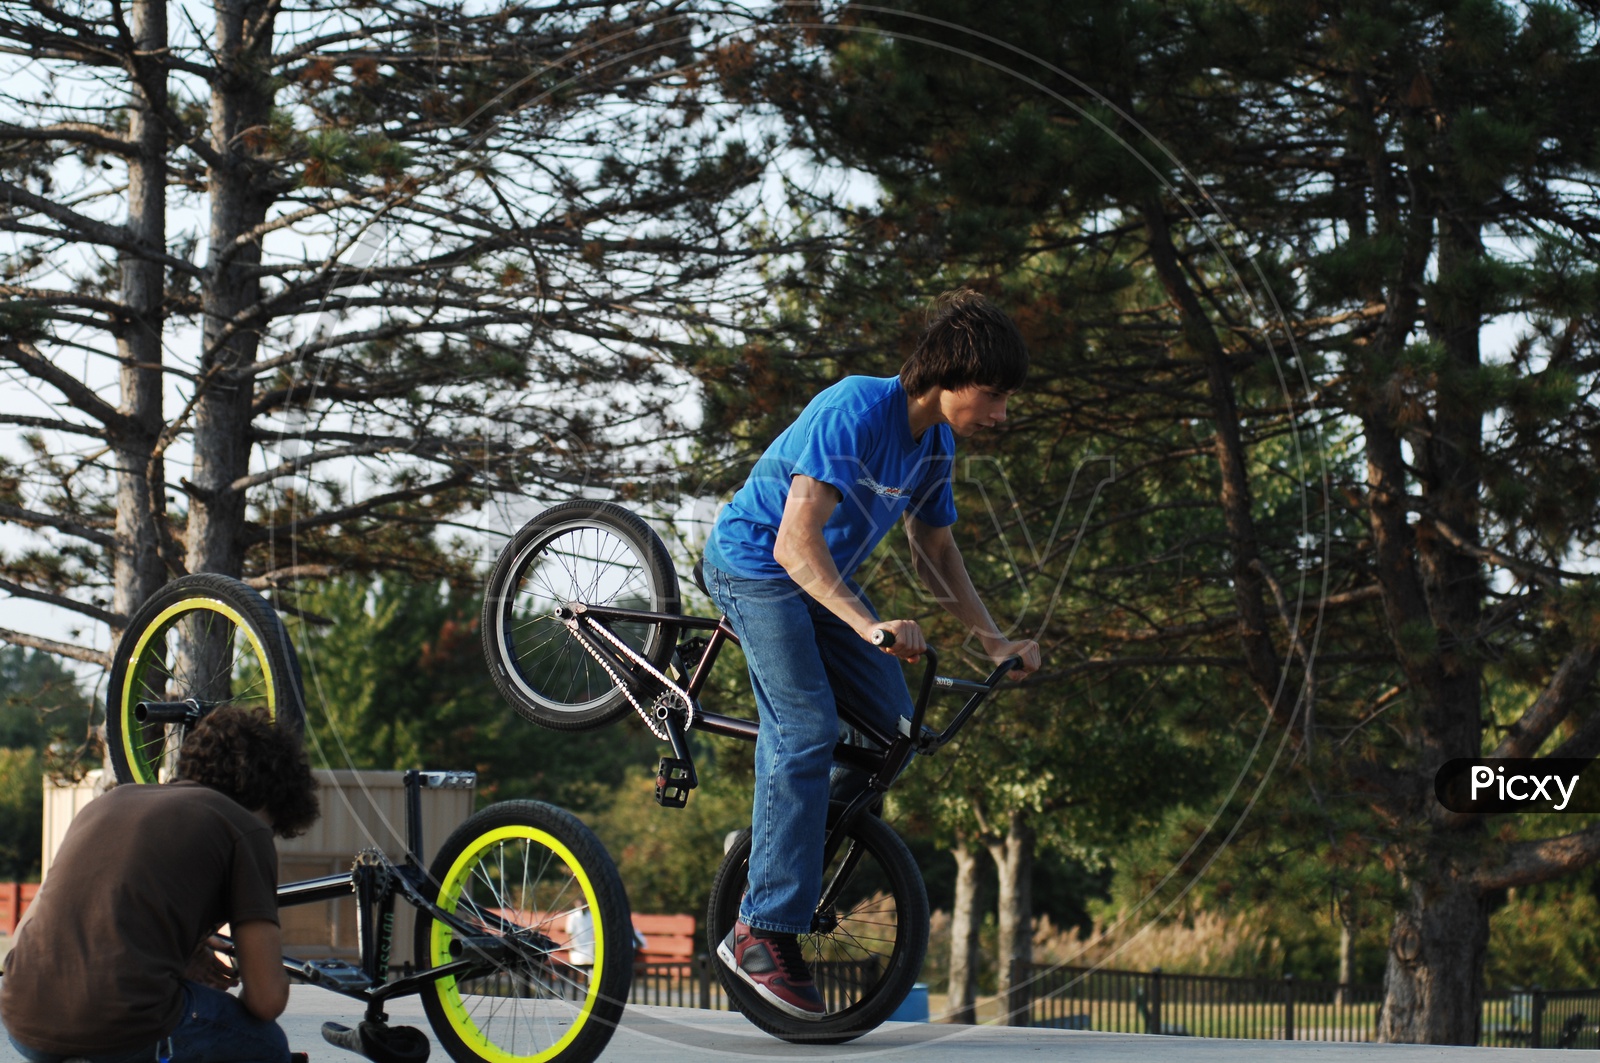 Children Riding Bicycle and doing Stunts